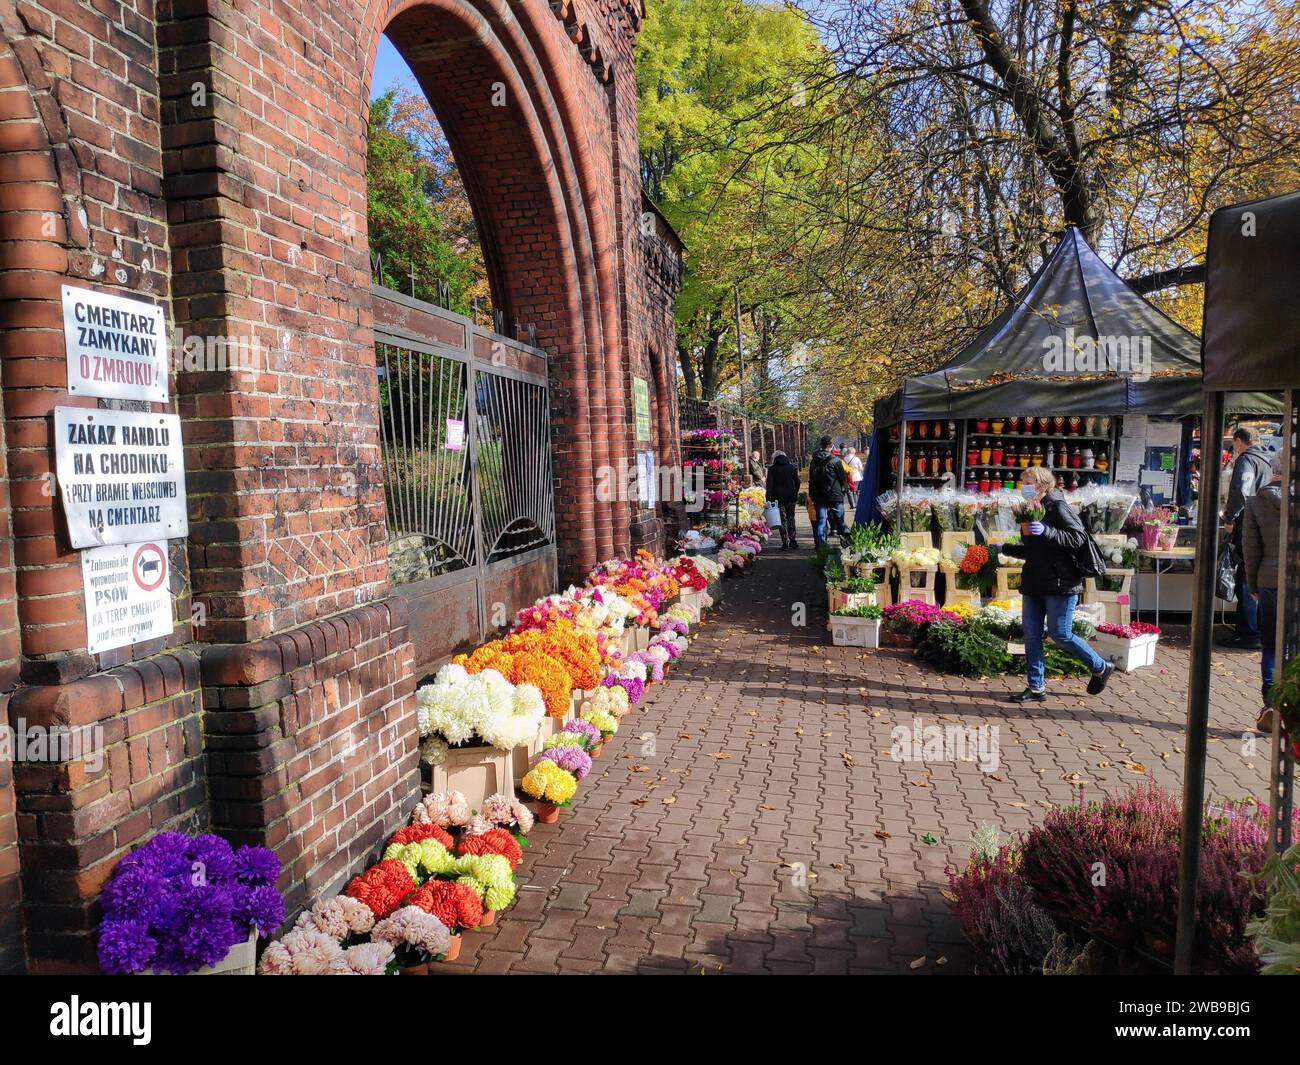 BYTOM, POLAND - OCTOBER 25, 2020: Cemetery candle and artificial flower shop before All Saints Day in Bytom. All Saints Day celebration at cemeteries Stock Photo